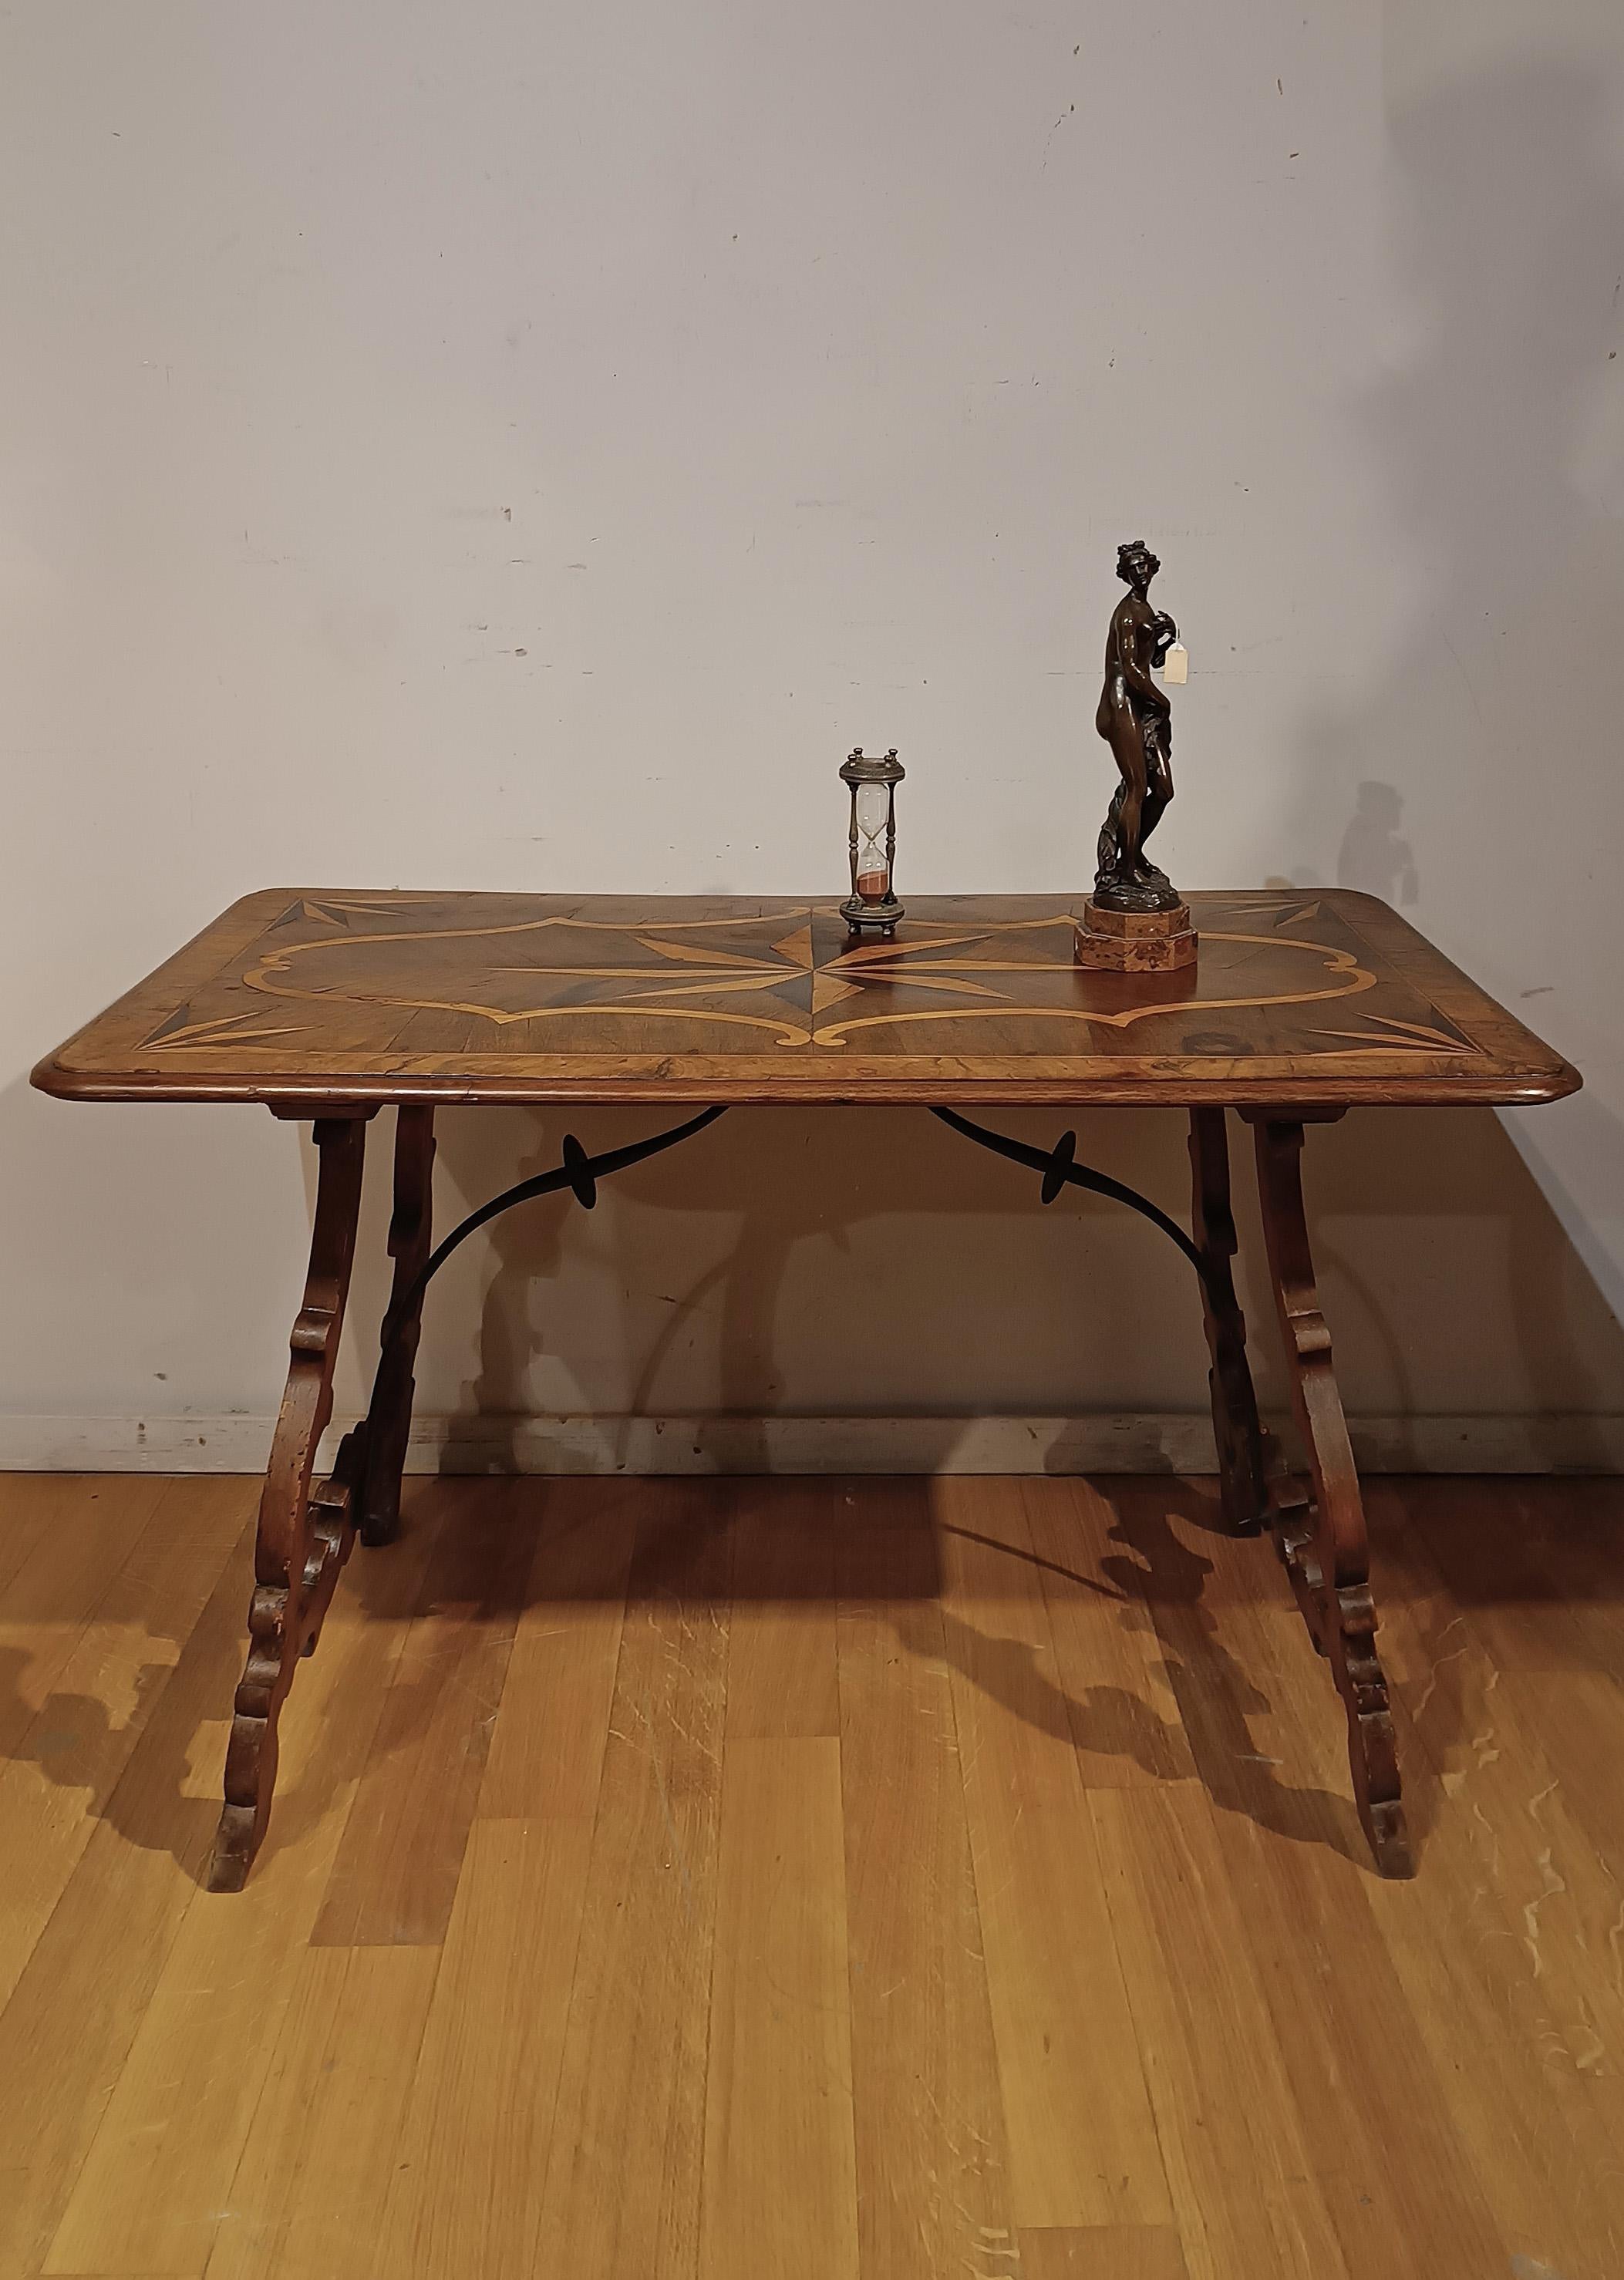 EARLY 18th CENTURY INLAID TABLE WITH LYRE LEGS For Sale 4